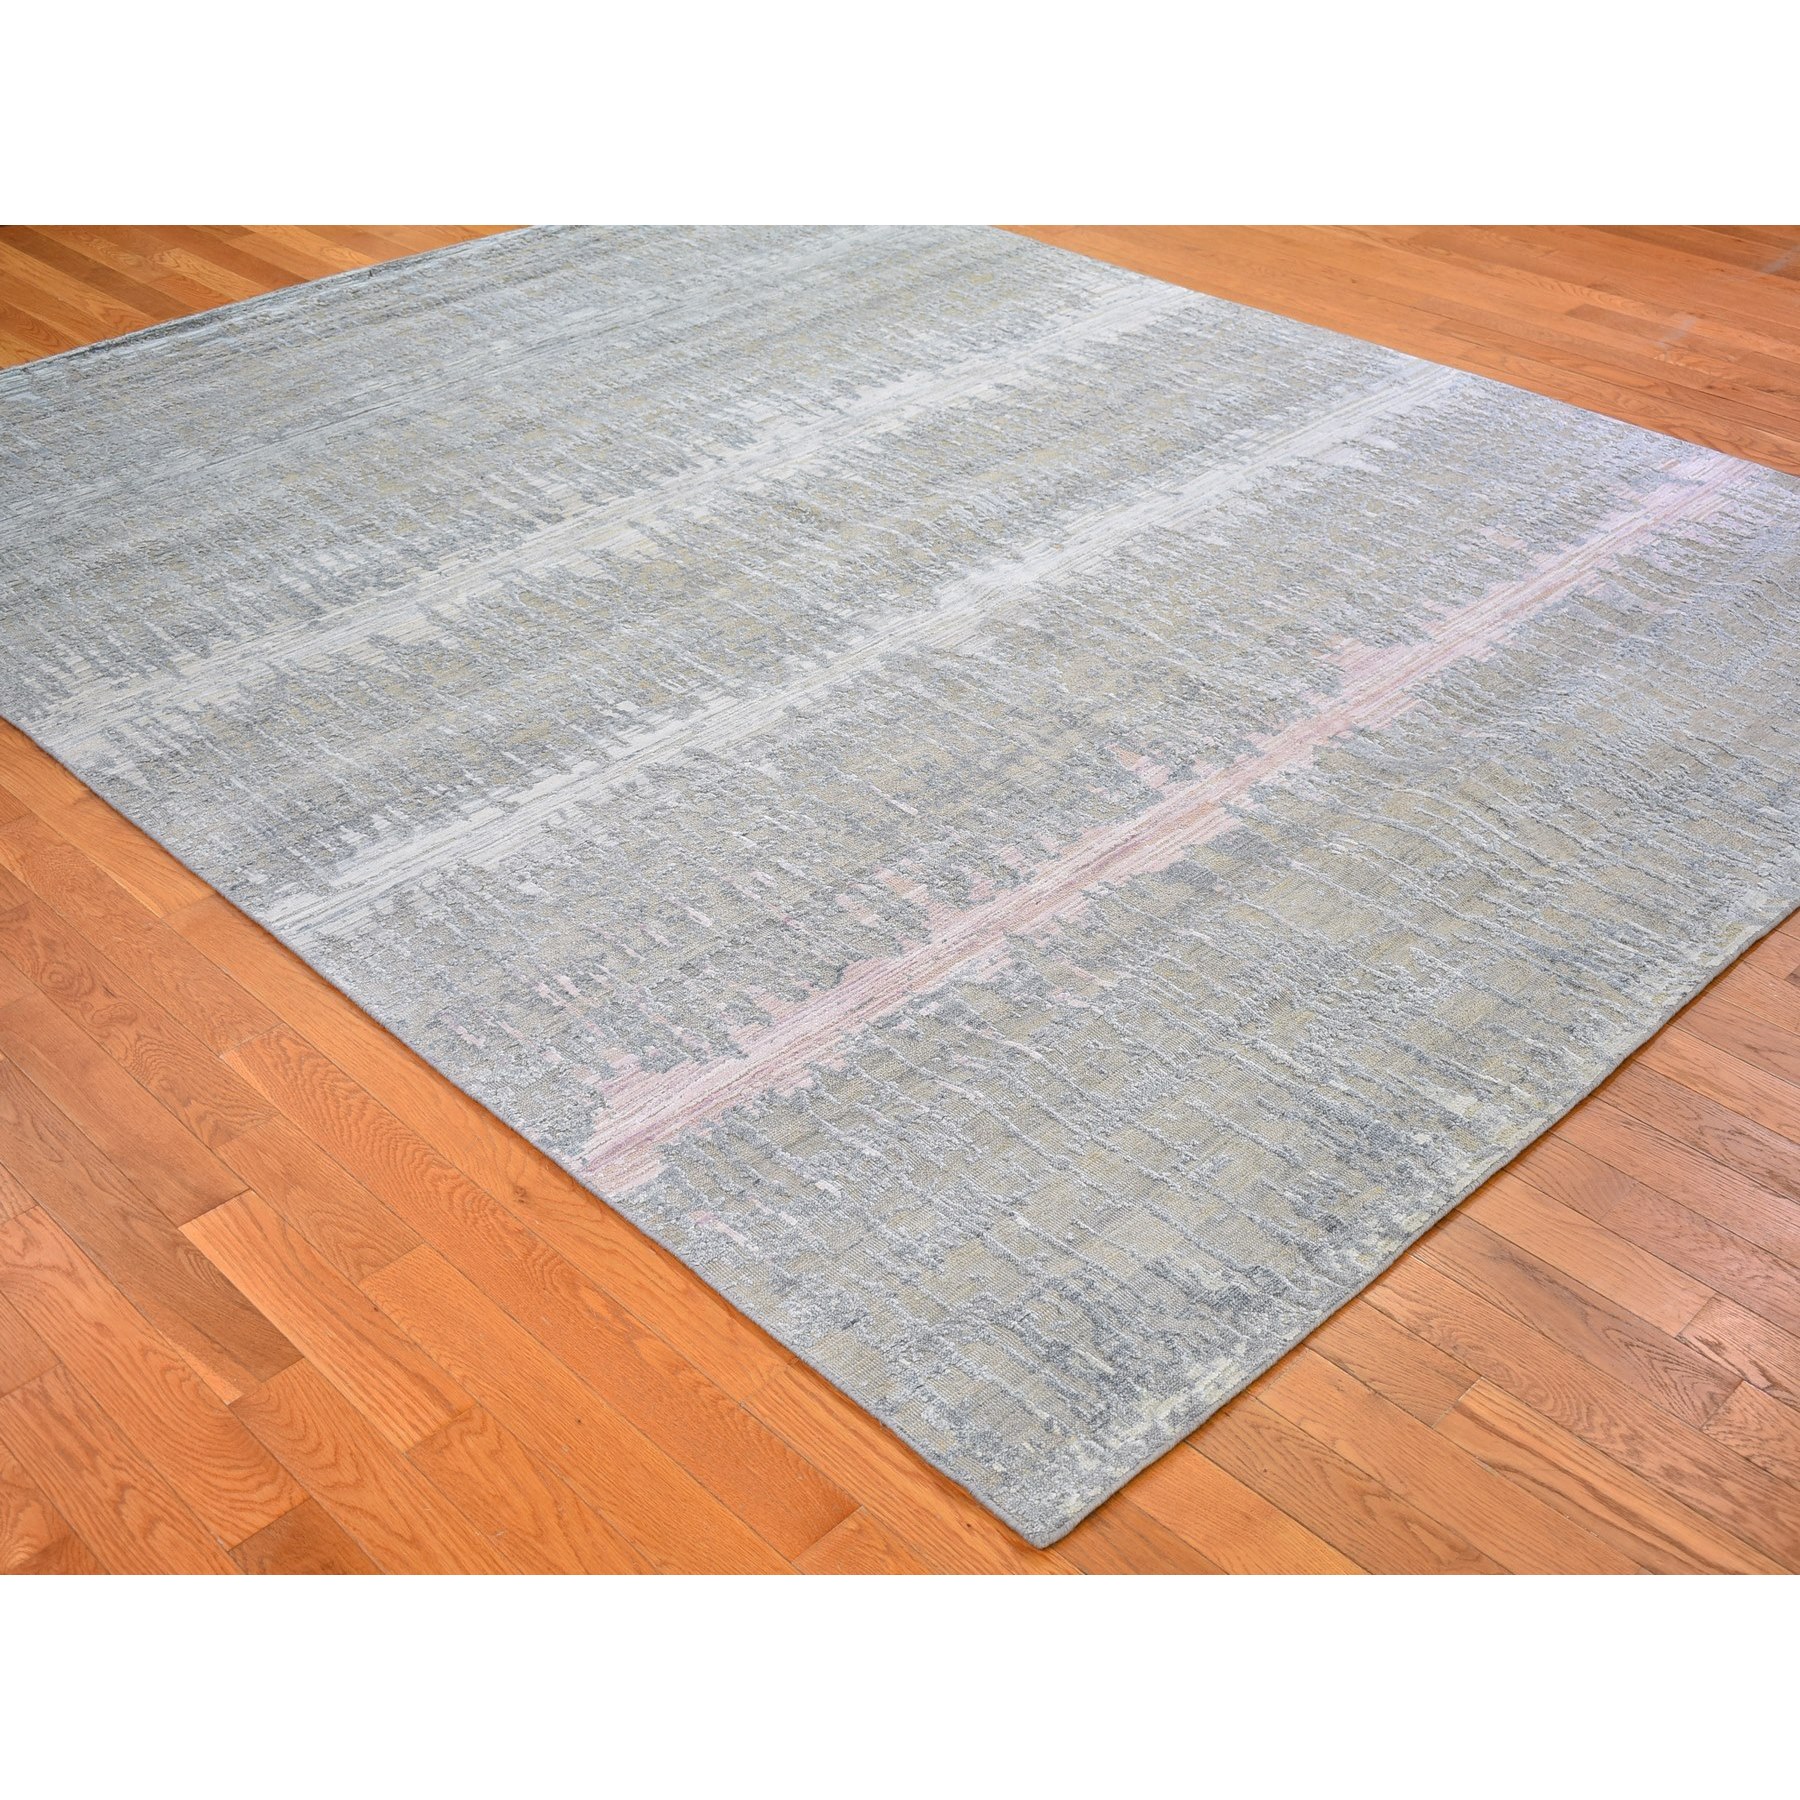 8'x10'3" Hand Woven Cardiac Design with Pastel Colors Textured Wool and Pure Silk Oriental Rug 